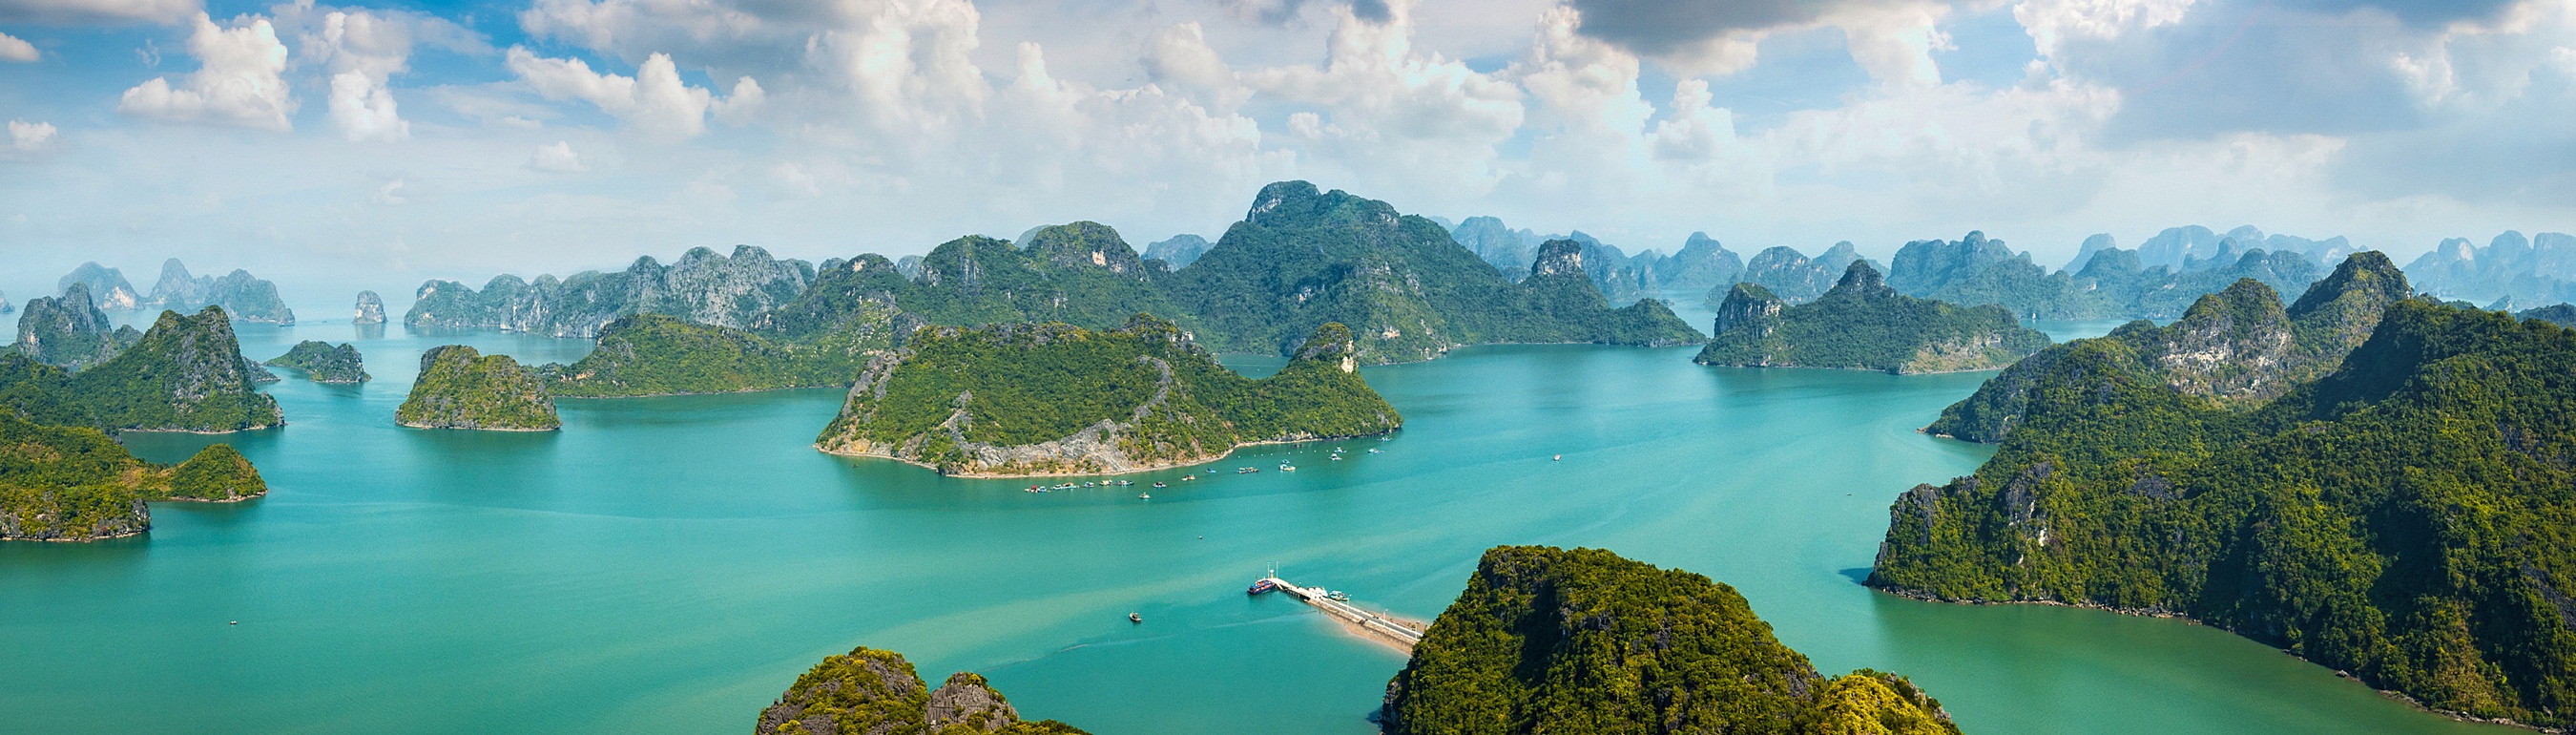 Halong Bay Tours from Hanoi - Halong Bay Travel & Private Trips